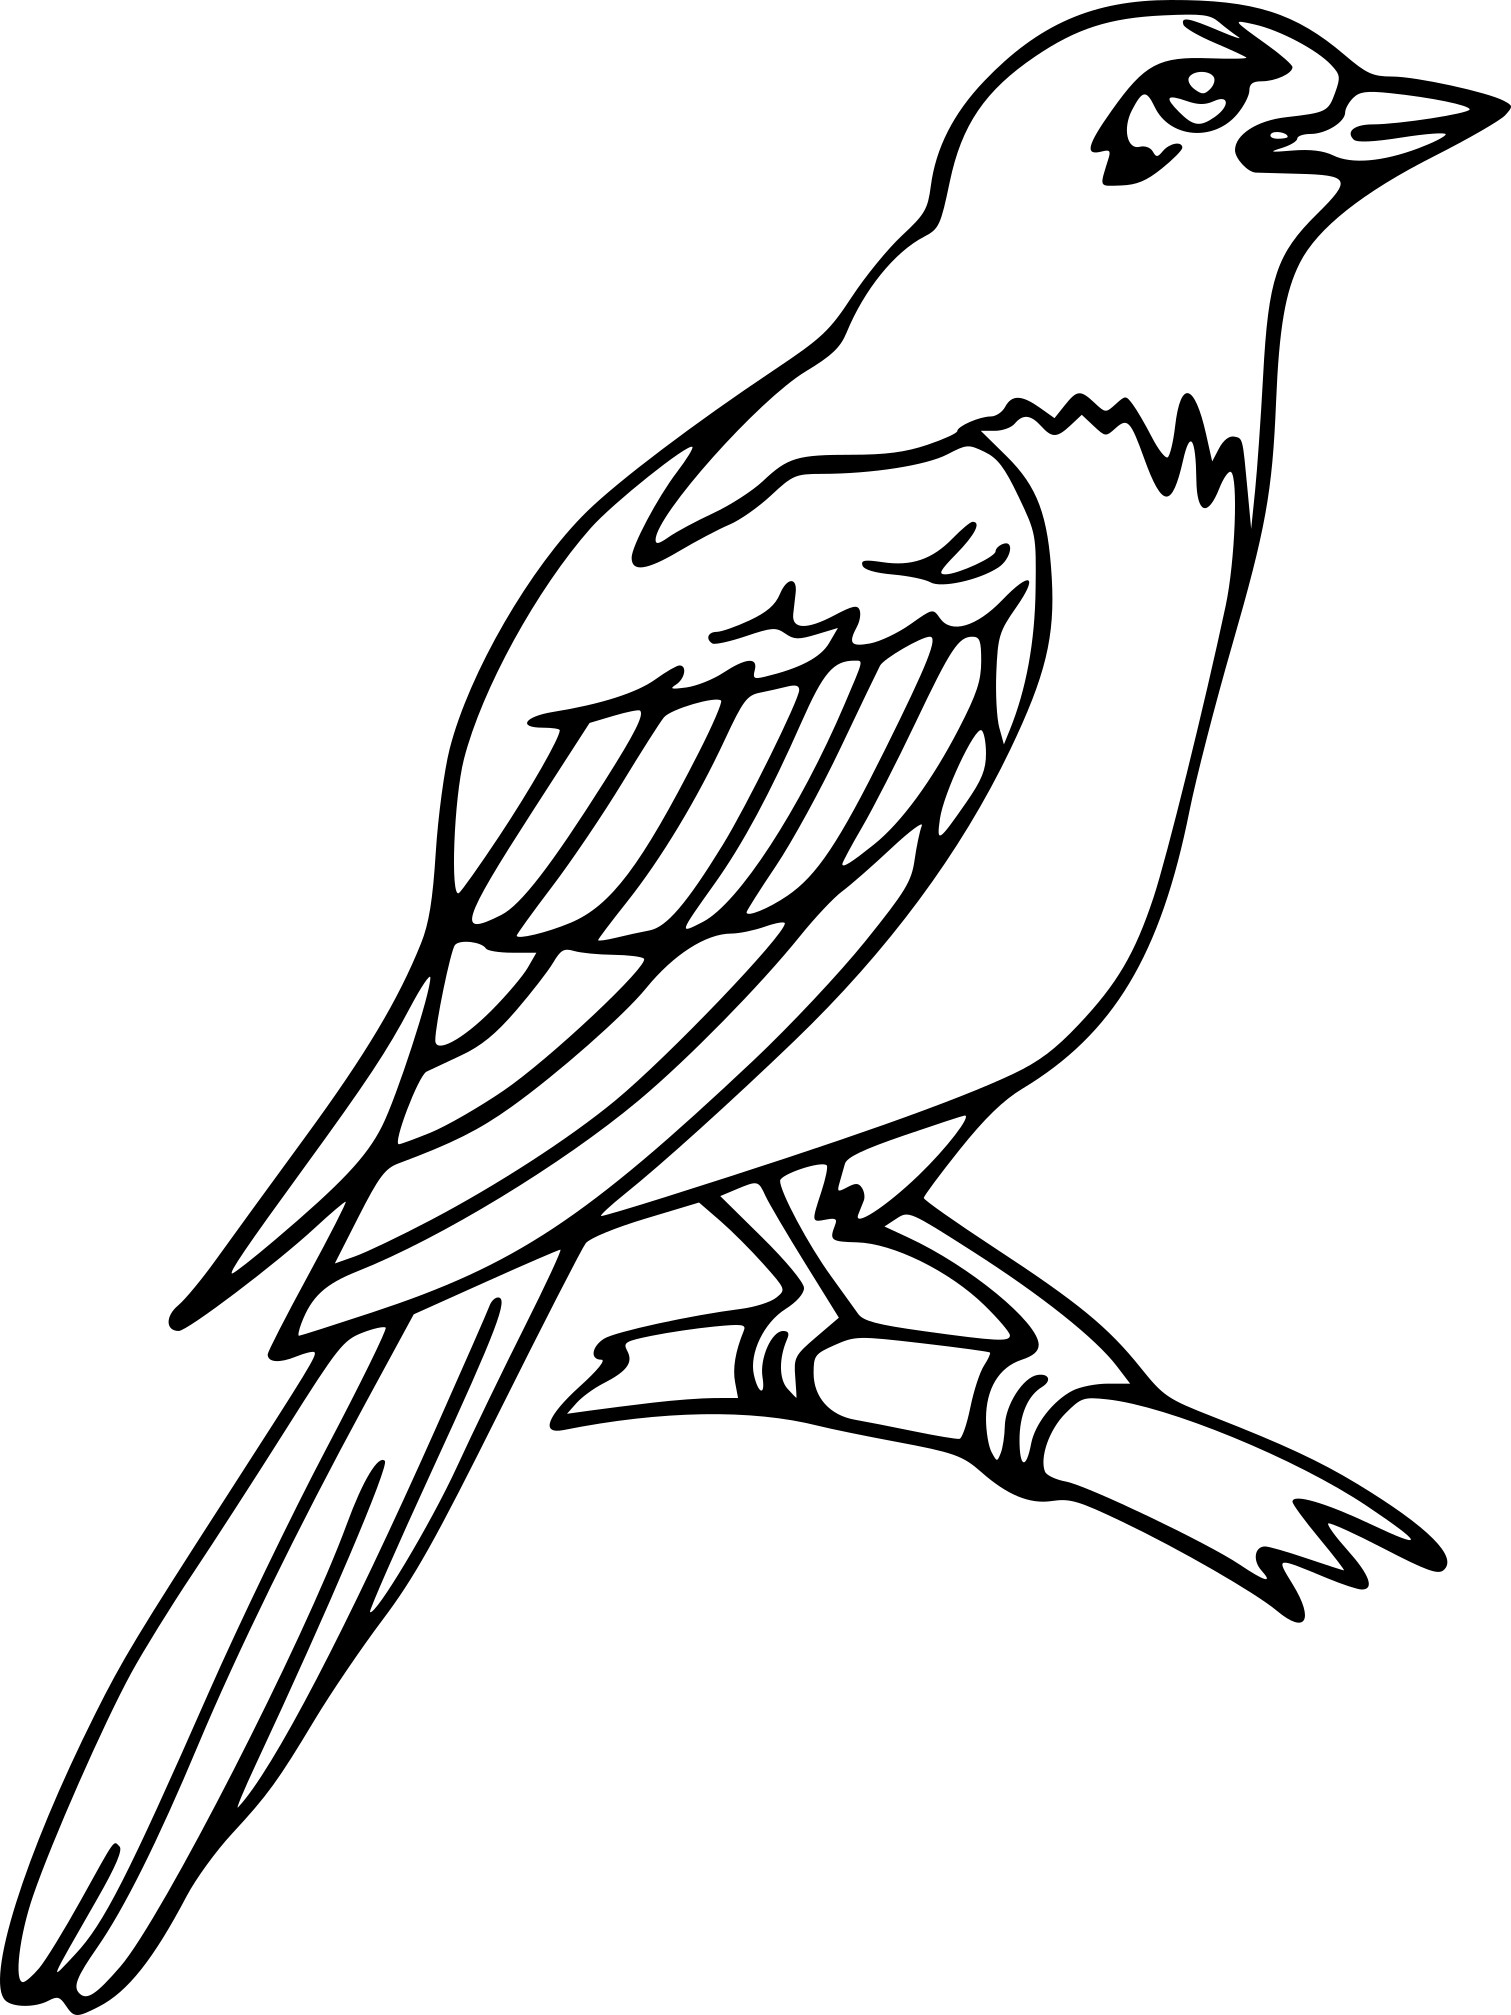 Magpie coloring page - free printable coloring pages on coloori.com